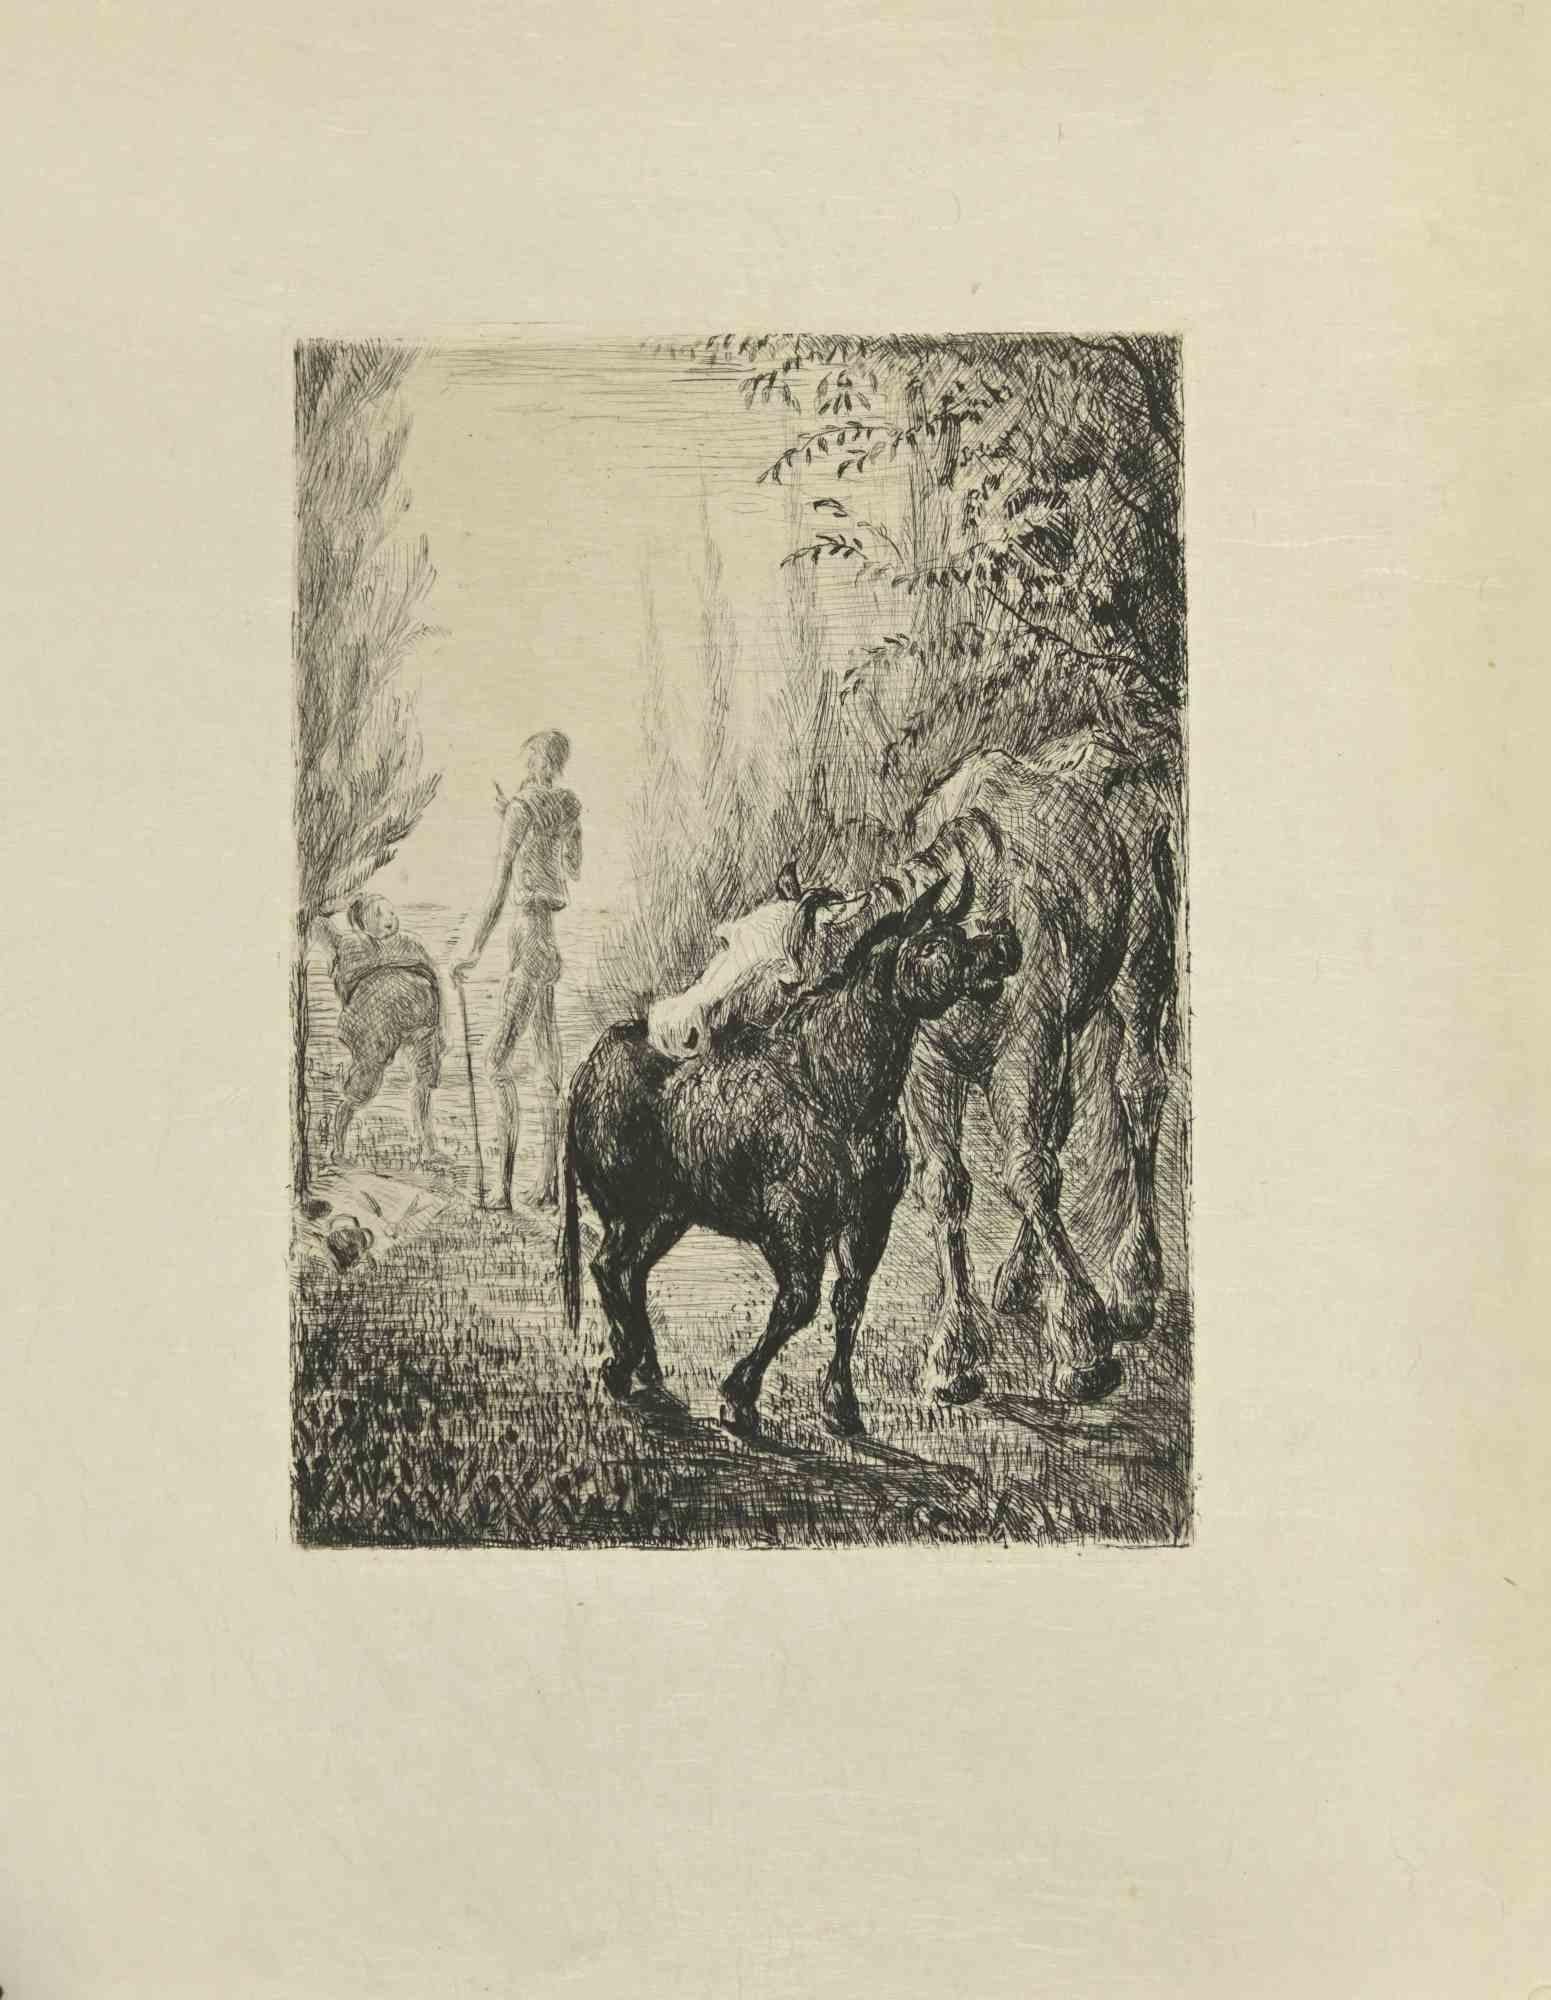 Don Quixote and Sancho is an etching and drypoint print on ivory-colored Japanese paper, realized by Wladyslaw Jahl in 1951.

It belongs to a limited edition of 125 specimens.

Good conditions.

The artwork represents a visual scene from Don Quixote